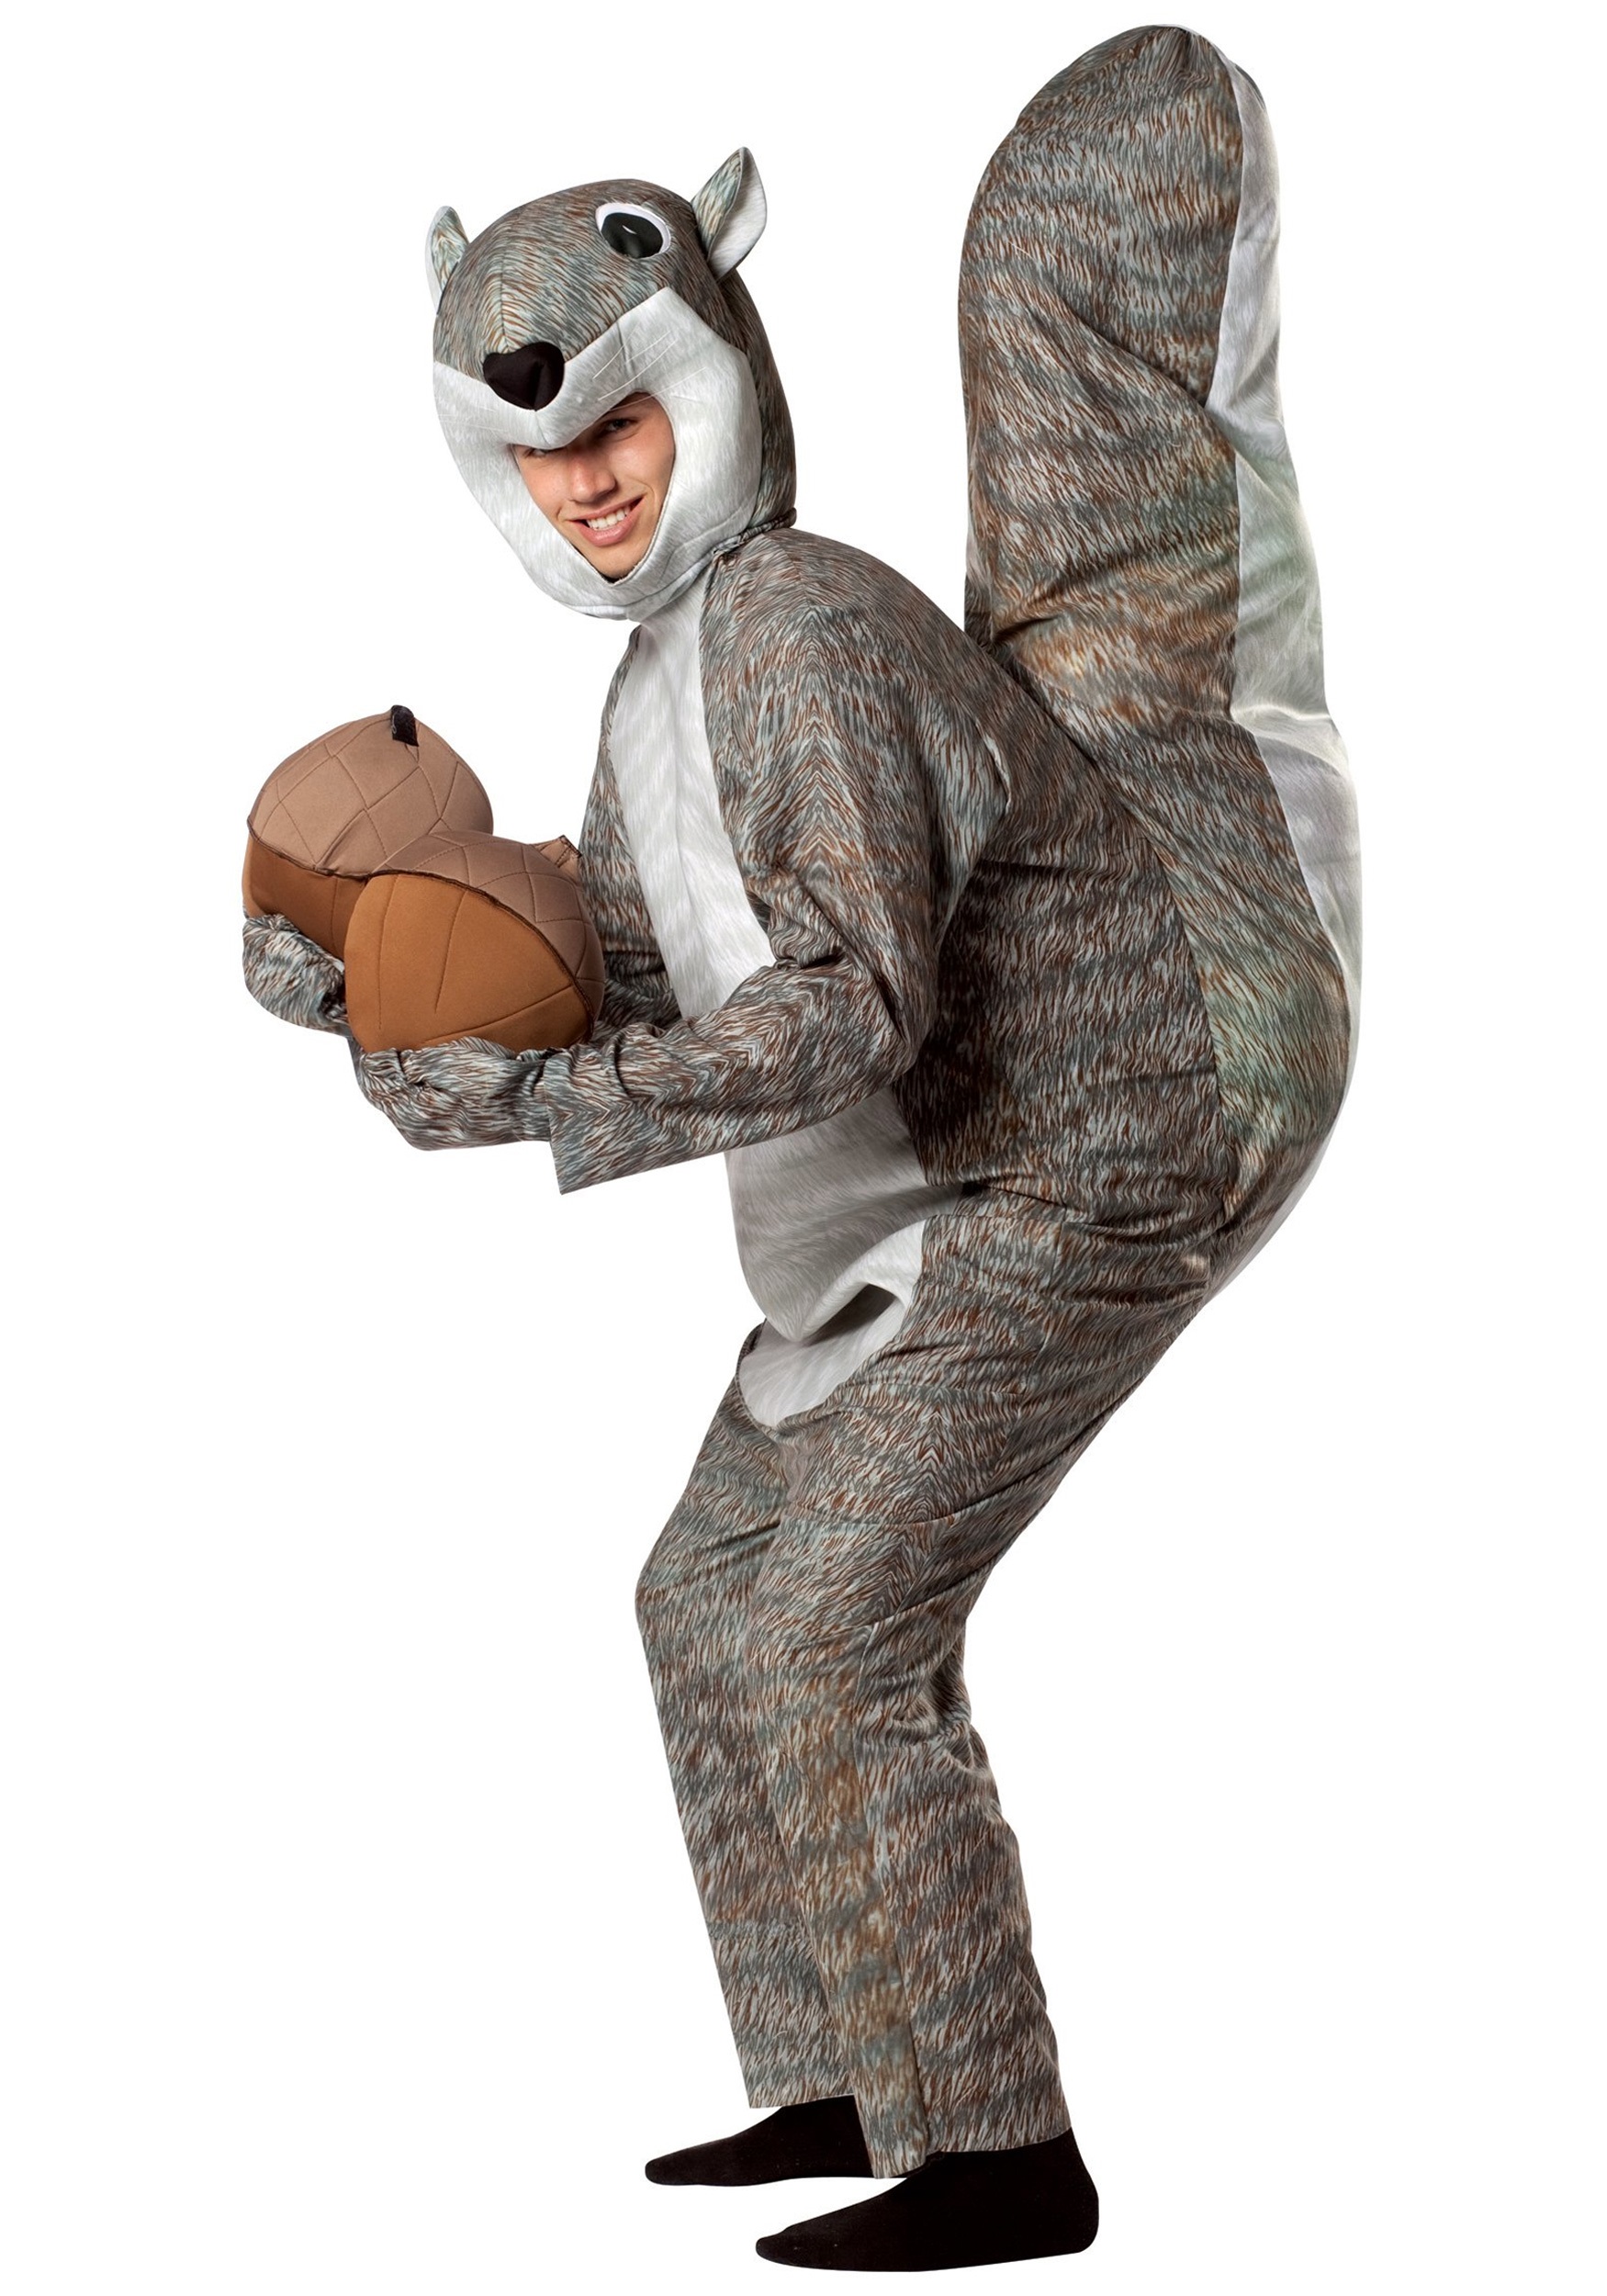 Squirrel Costumes &amp; Suits for Adults &amp; Kids - HalloweenCostumes.com